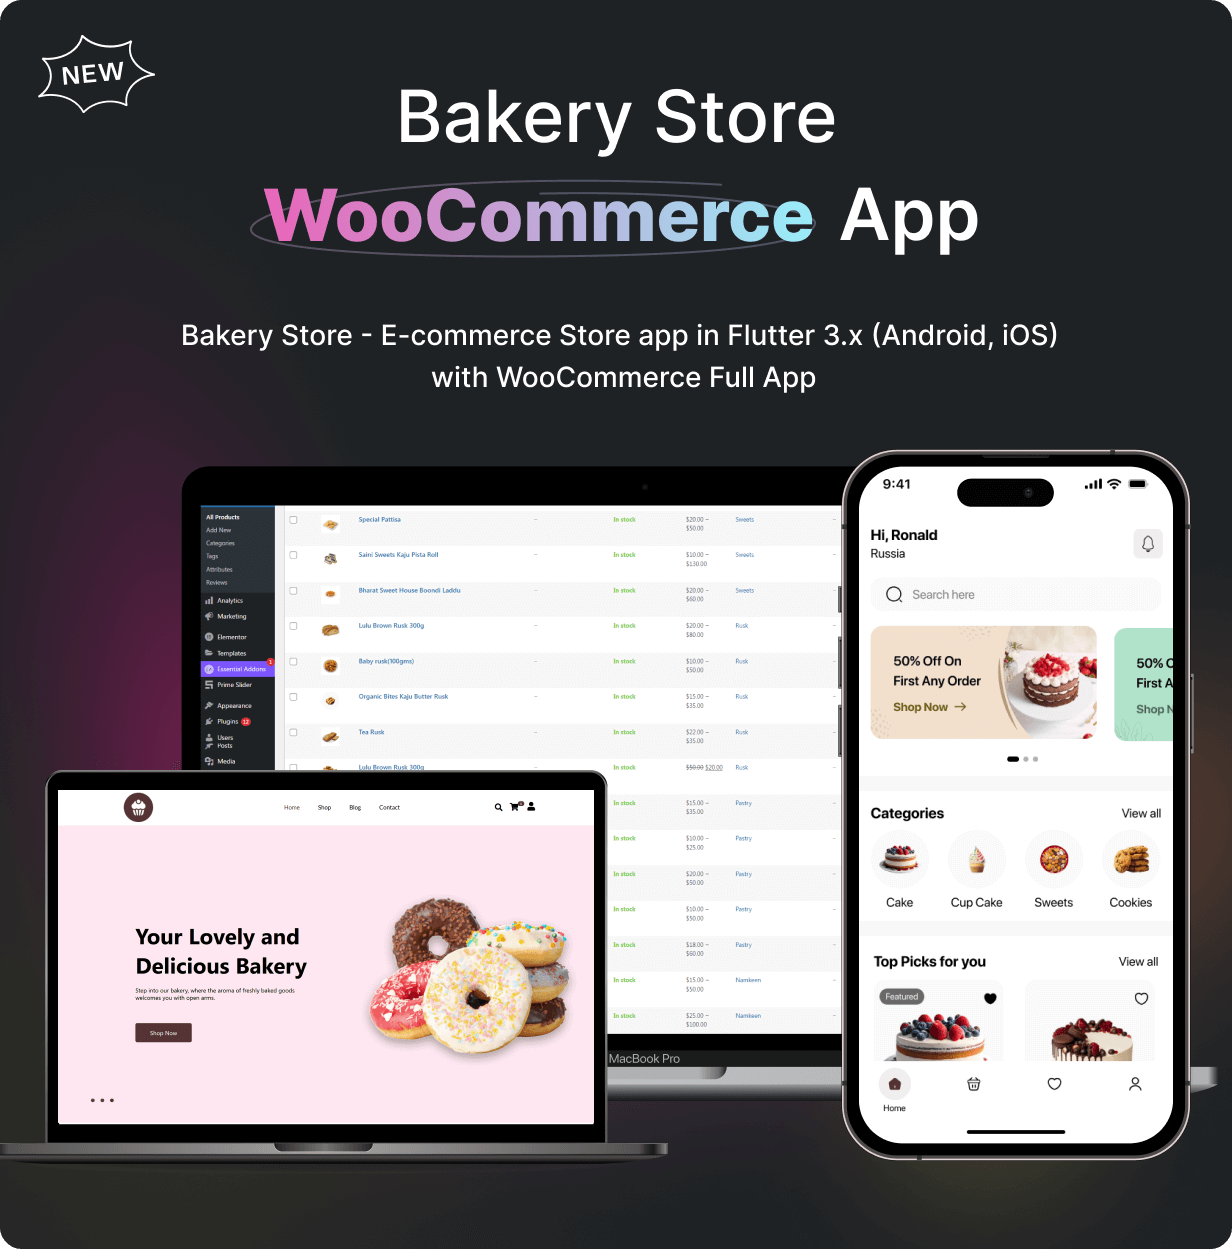 Bakery Shop App - E-commerce Store app in Flutter 3.x (Android, iOS) with WooCommerce Full App - 5